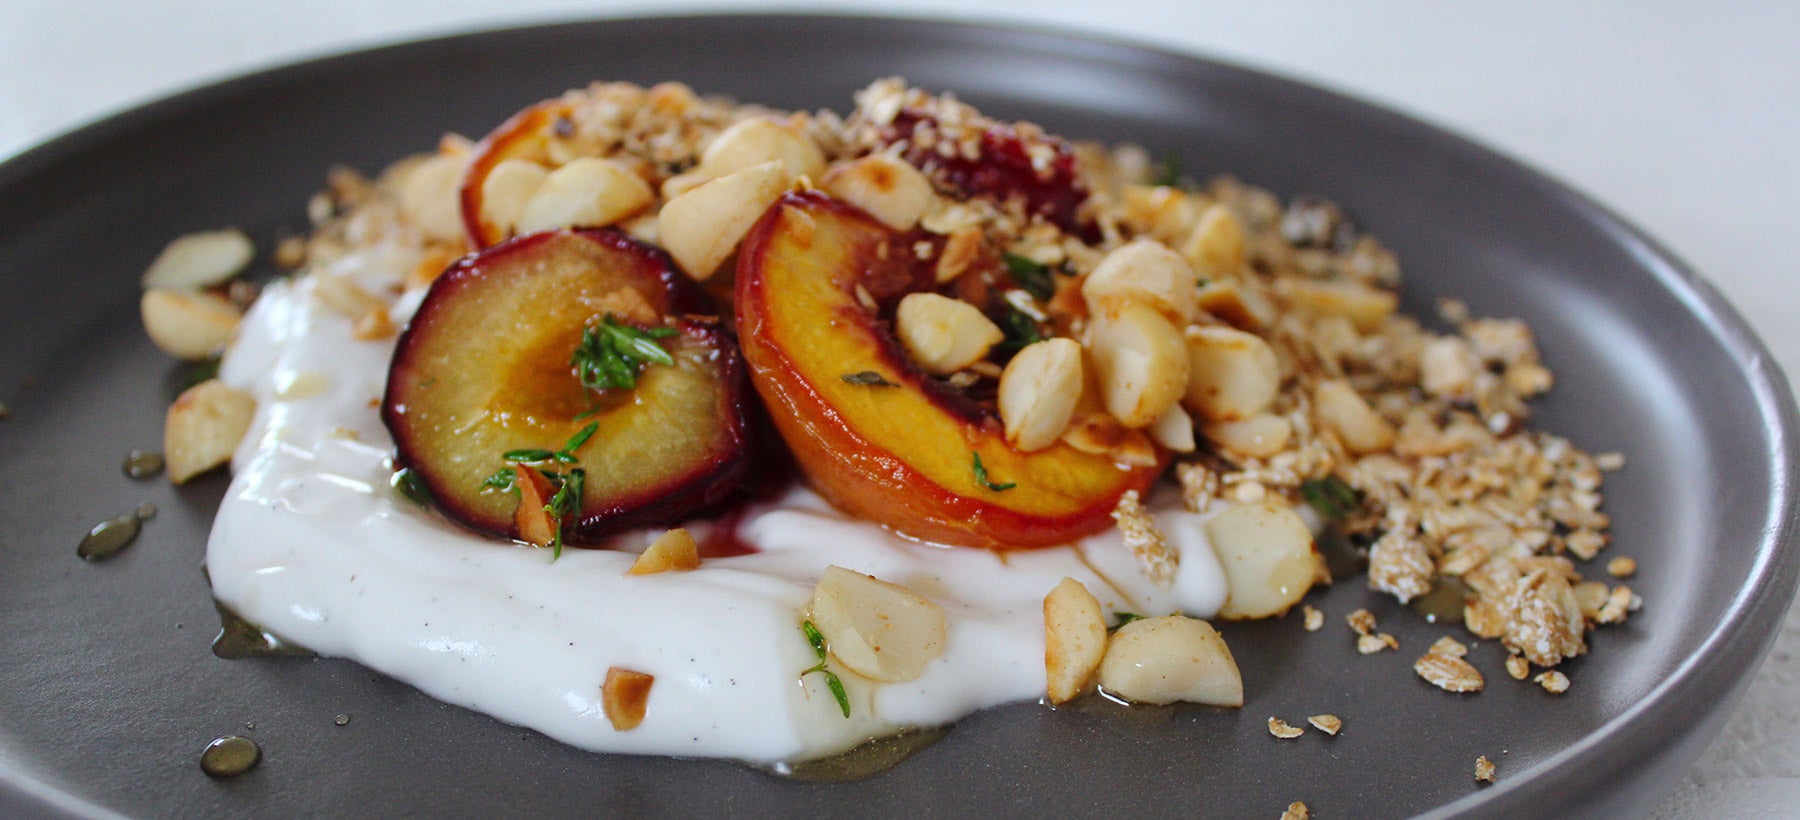 plate-of-yoghurt-grilled-peaches-nuts-and-oats